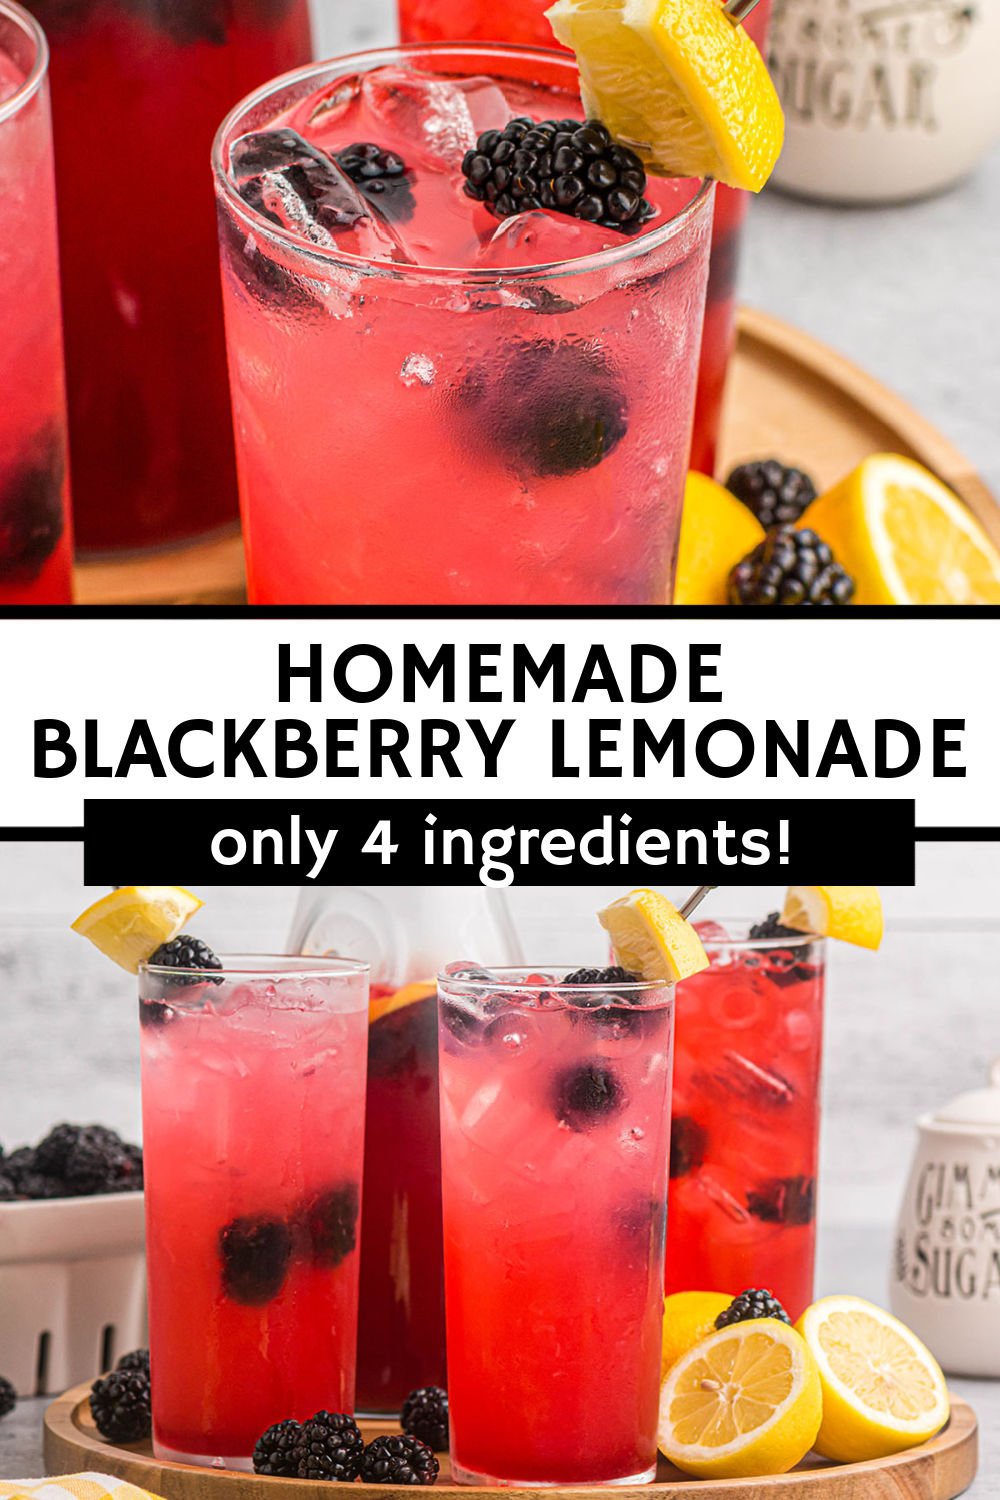 Homemade Blackberry Lemonade is really easy to make and perfect for warm weather. Made with fresh berries, lemon juice, and a blackberry simple syrup, this easy lemonade recipe is refreshing, pretty, and perfect for the whole family! | www.persnicketyplates.com